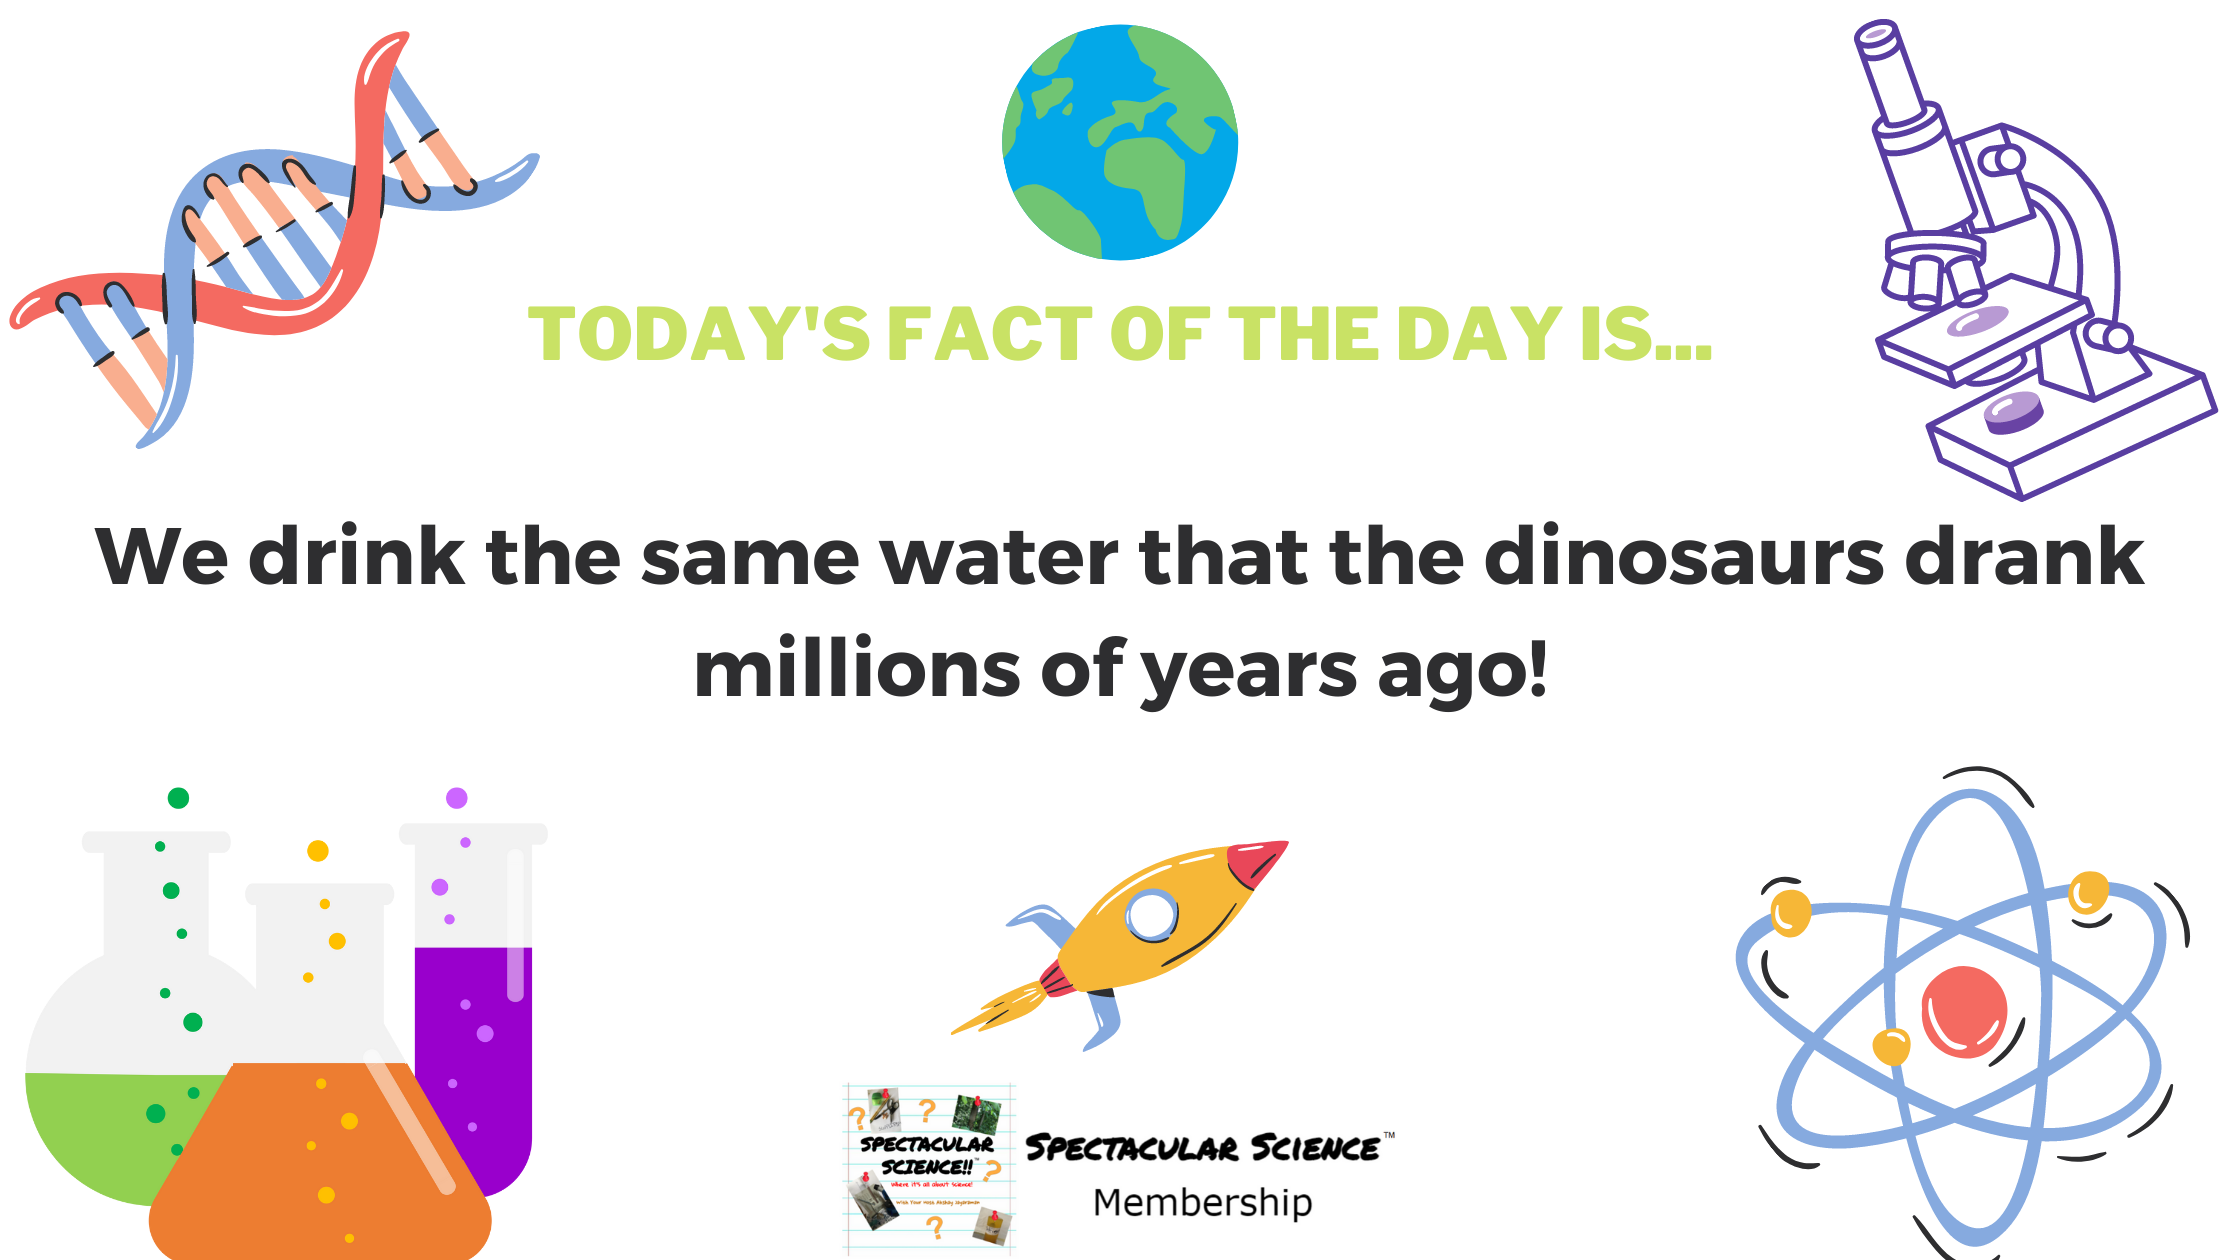 Fact of the Day Image Mar. 5th